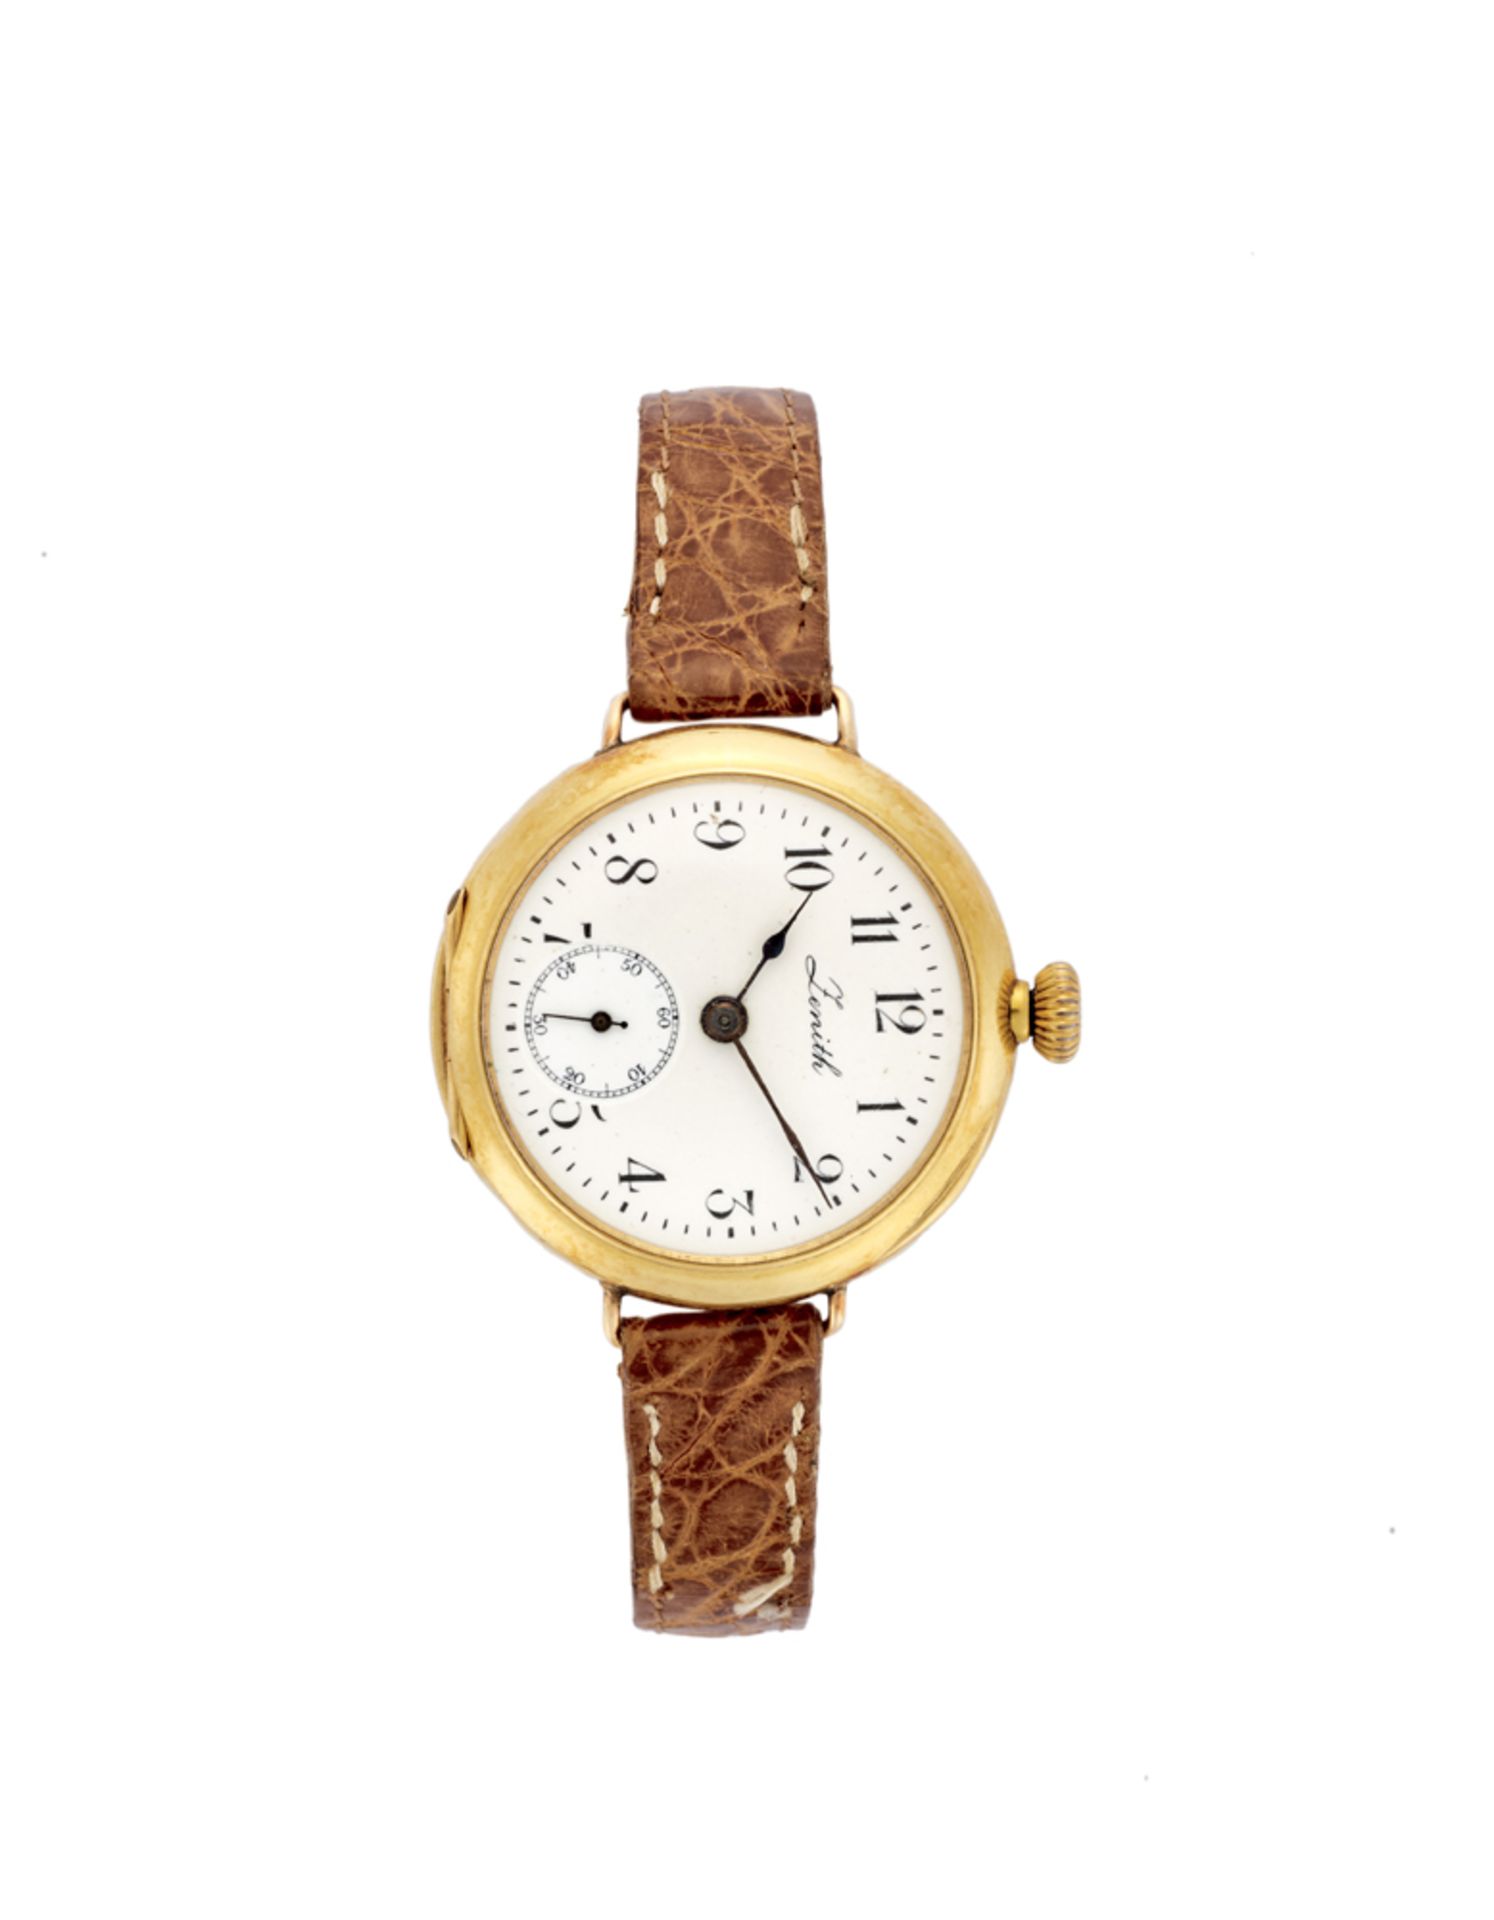 ZENITH<br>Lady's 18K gold wristwatch<br>1920s<br>Dial, movement and case signed<br>Manual wind movem